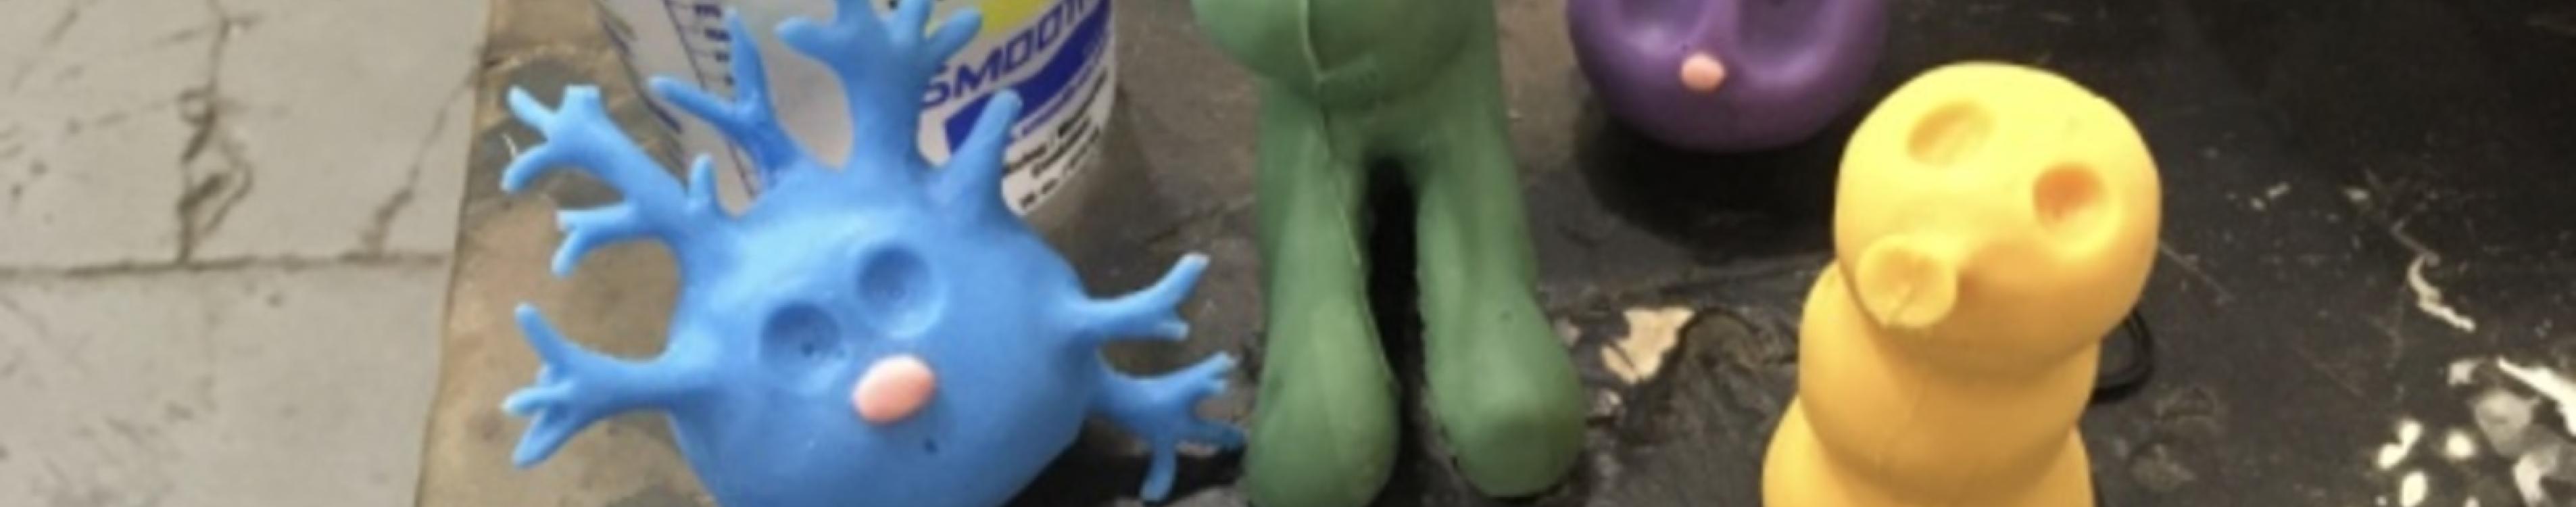 Blue, green, purple, and yellow claymation figures sit on the corner of a work table